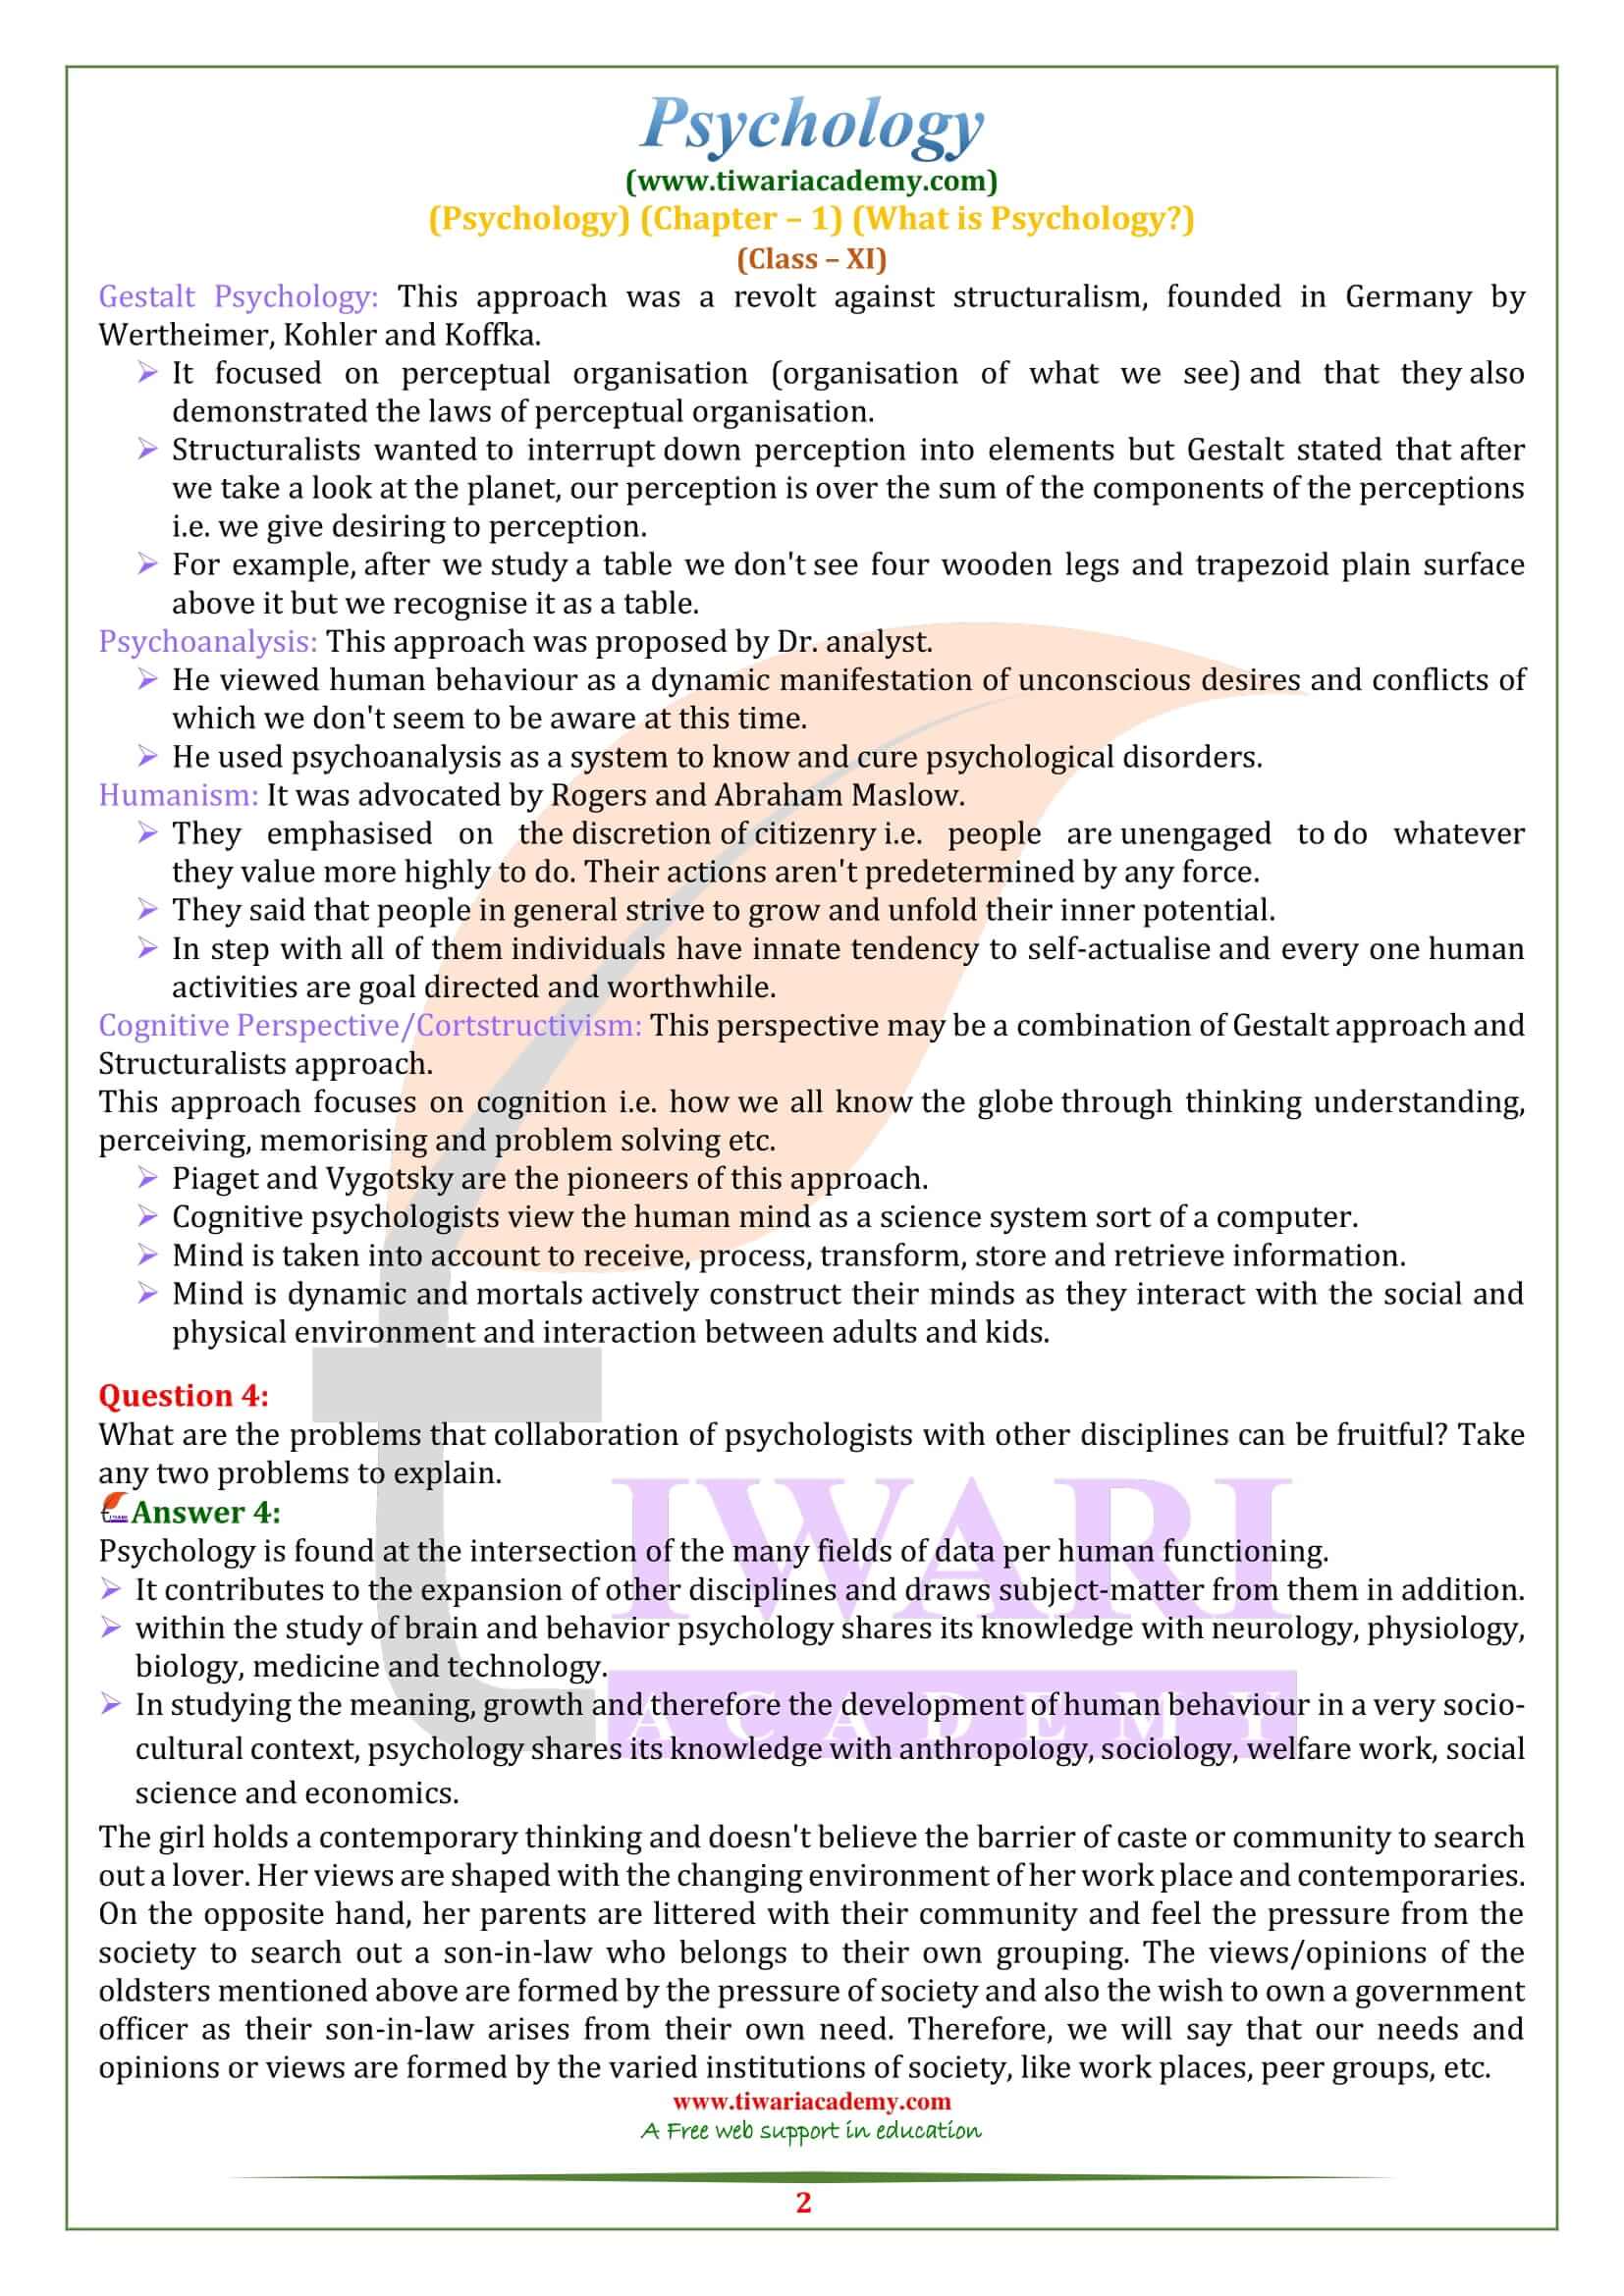 NCERT Solutions for Class 11 Psychology Chapter 1 in English Medium